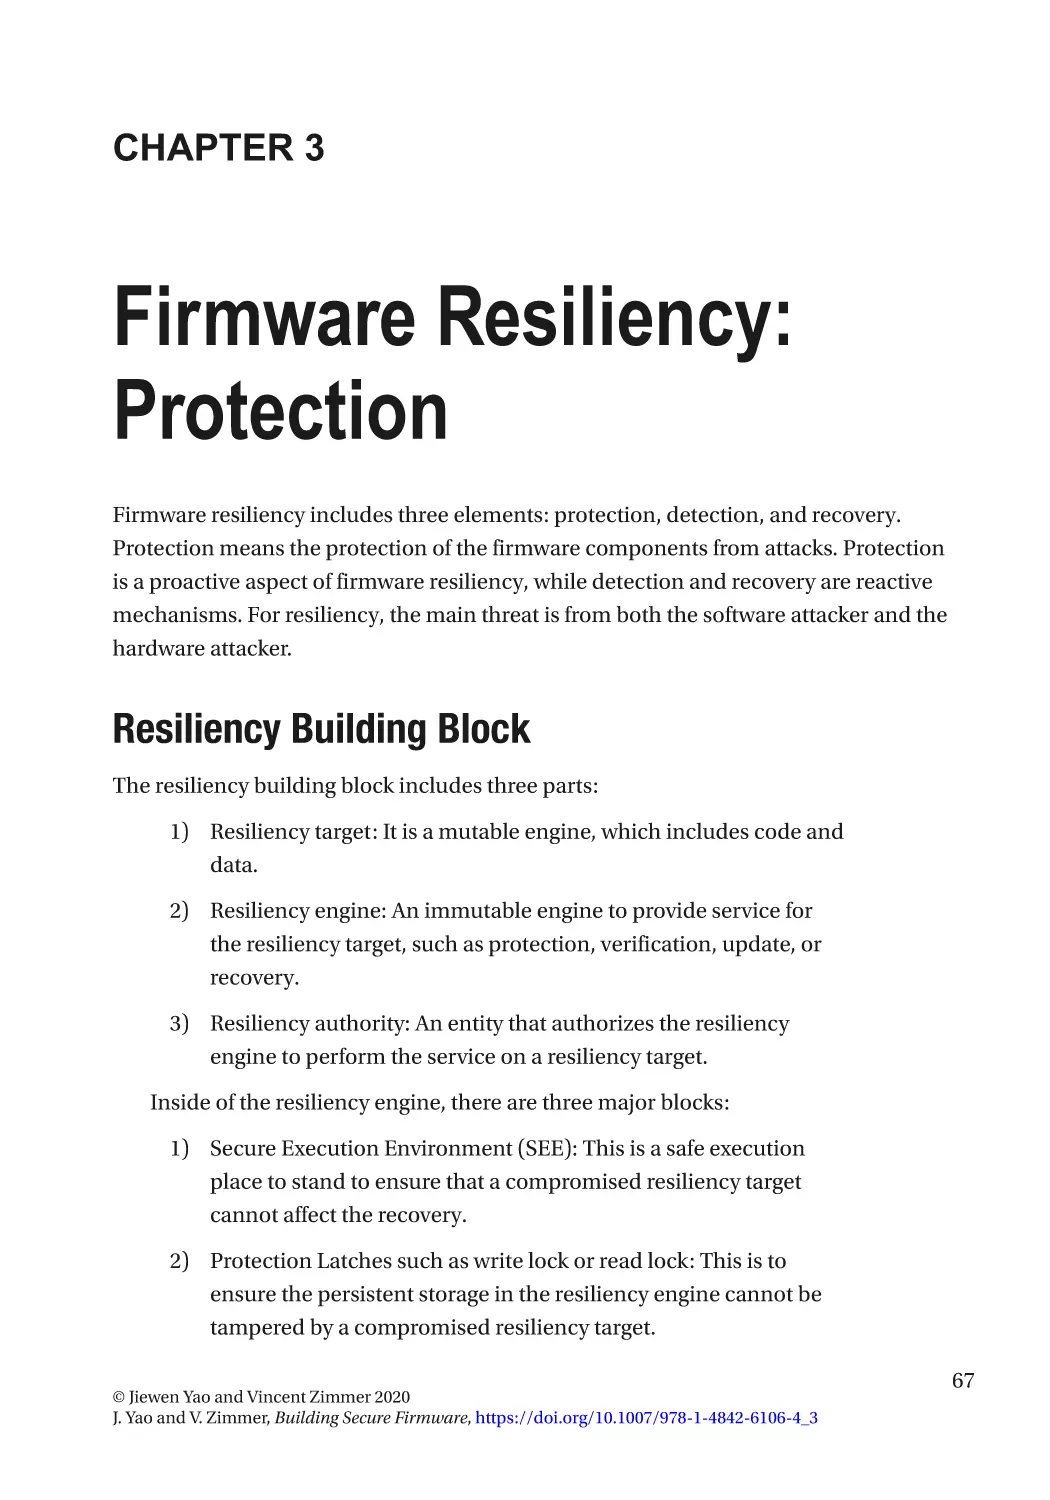 Chapter 3
Resiliency Building Block